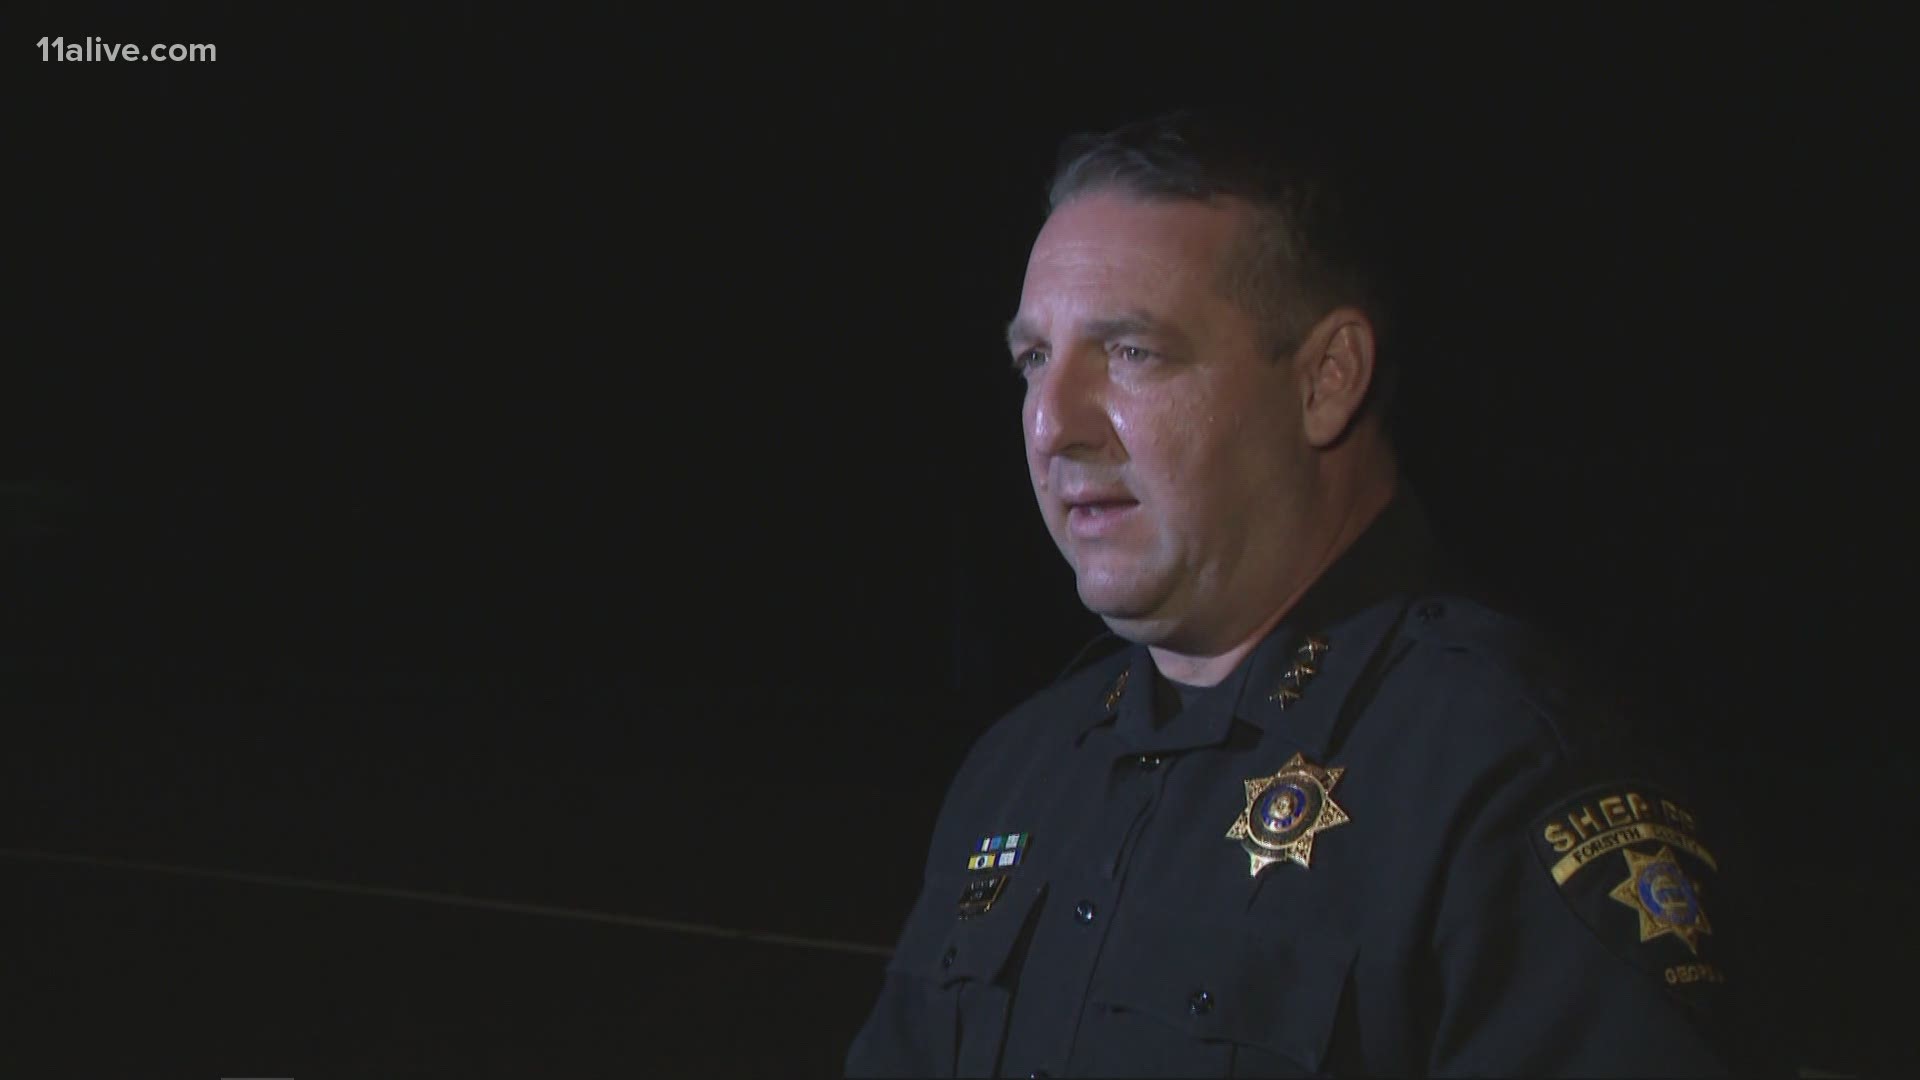 Sheriff Ron Freeman details what led up to a deadly shooting that left a suspect dead on Thursday evening.